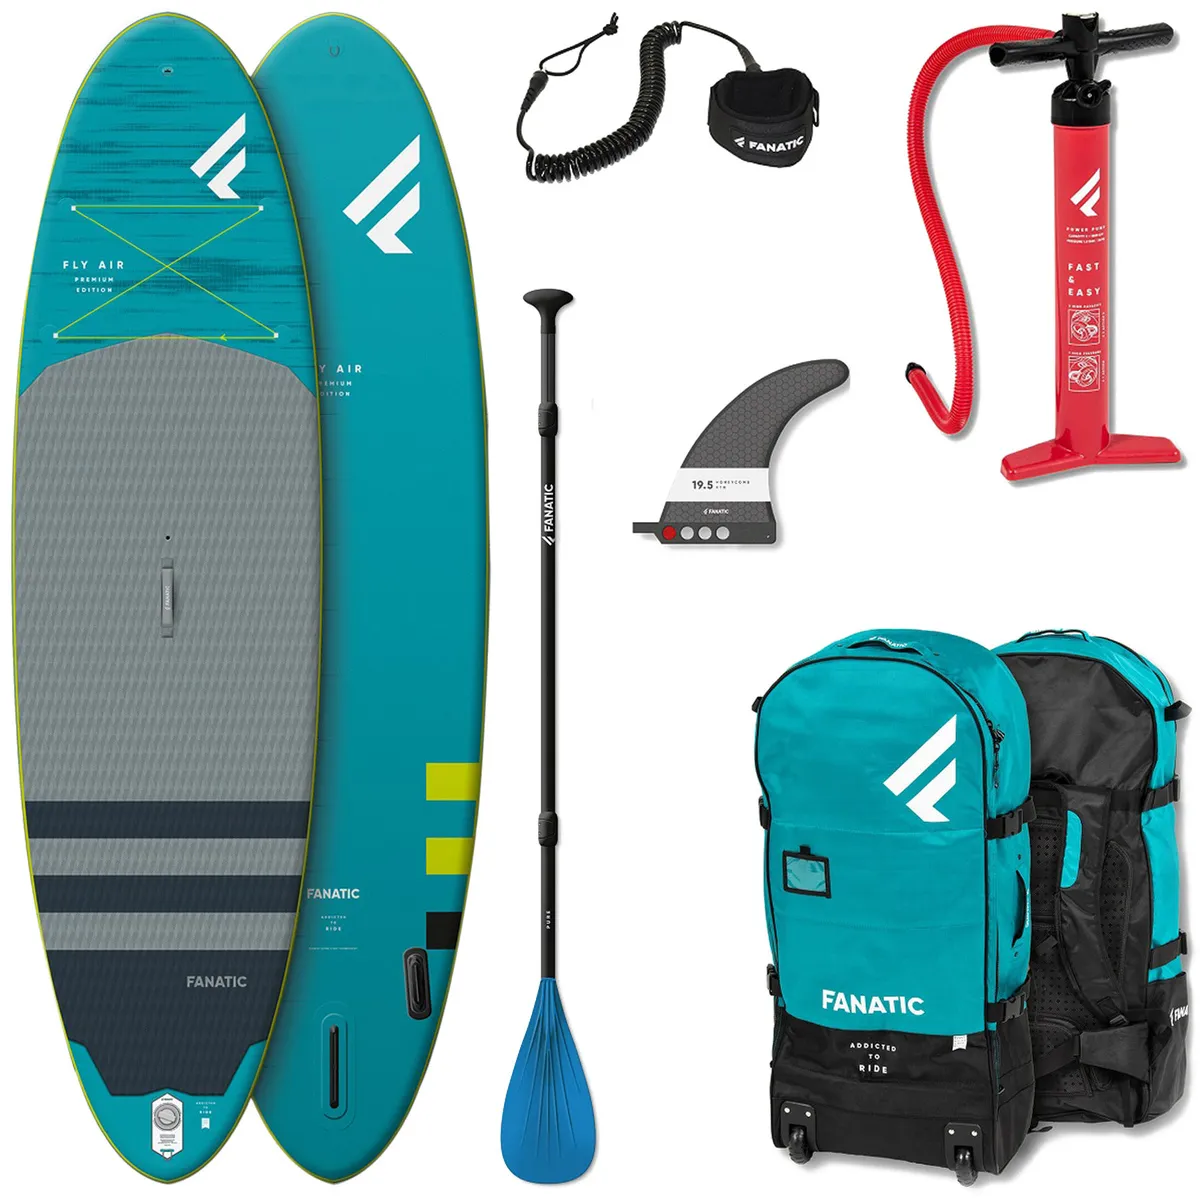 SUP GONFIABILE COMPLETO FLY AIR PREMIUM 10.4'